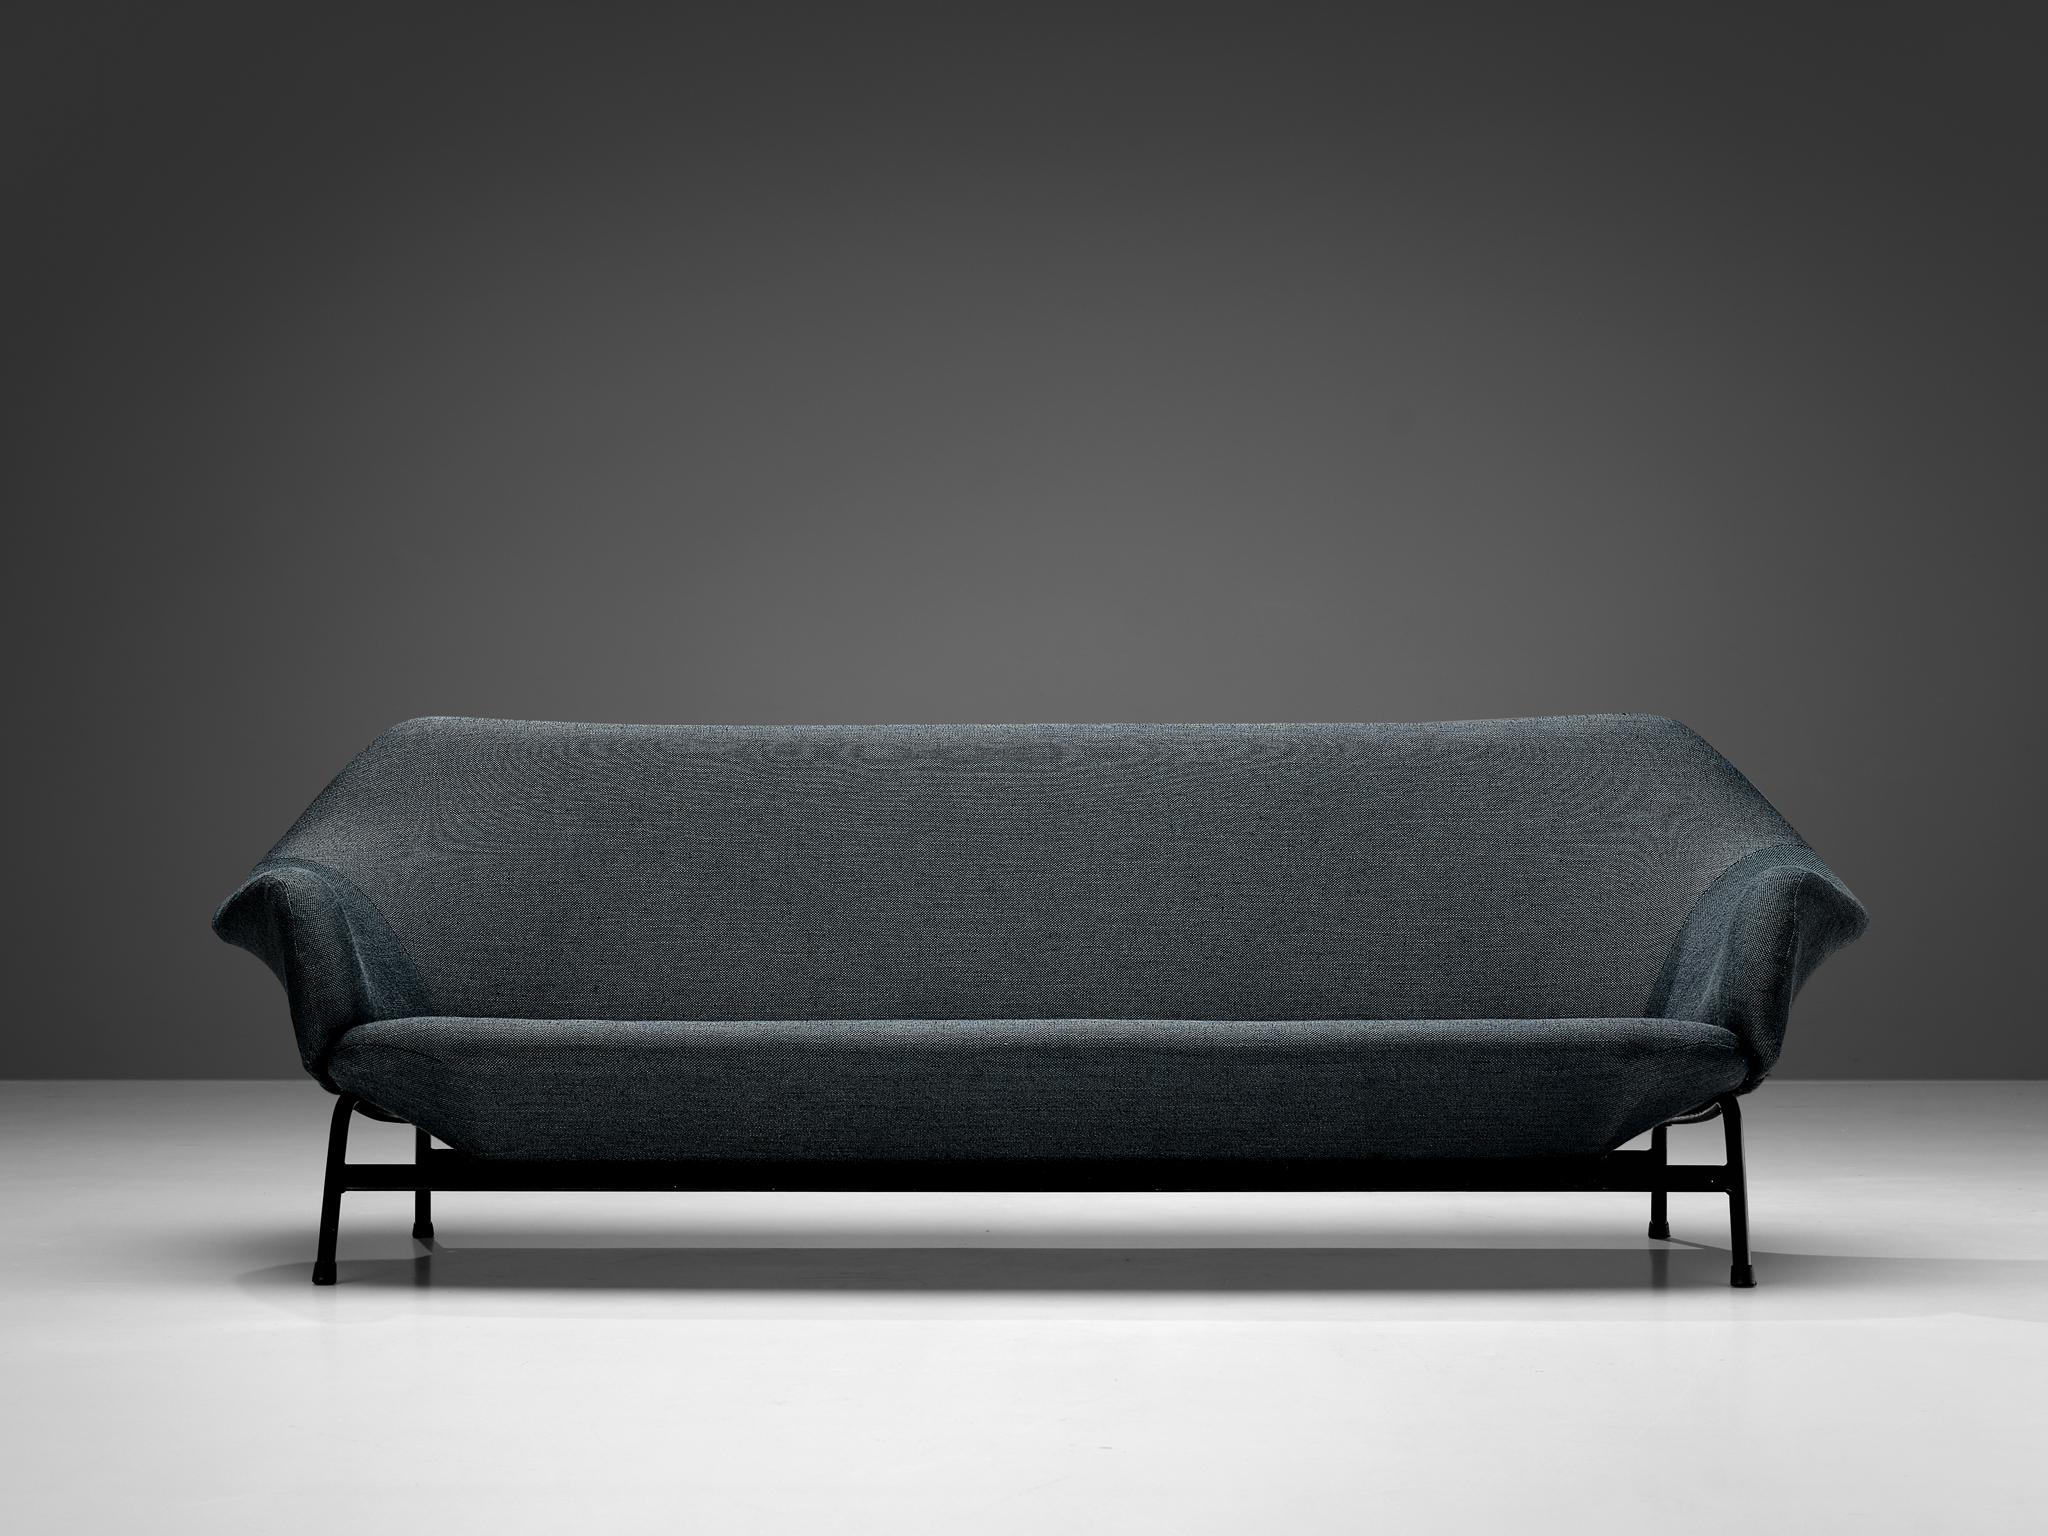 Sofa, Brevettato, fabric, metal, Italy, 1950s

This Italian sofa is characterized by a modest aesthetic due to its straight lines and round edges. The seating area is supported by a metal frame with sleek outward facing legs. The back elegantly runs